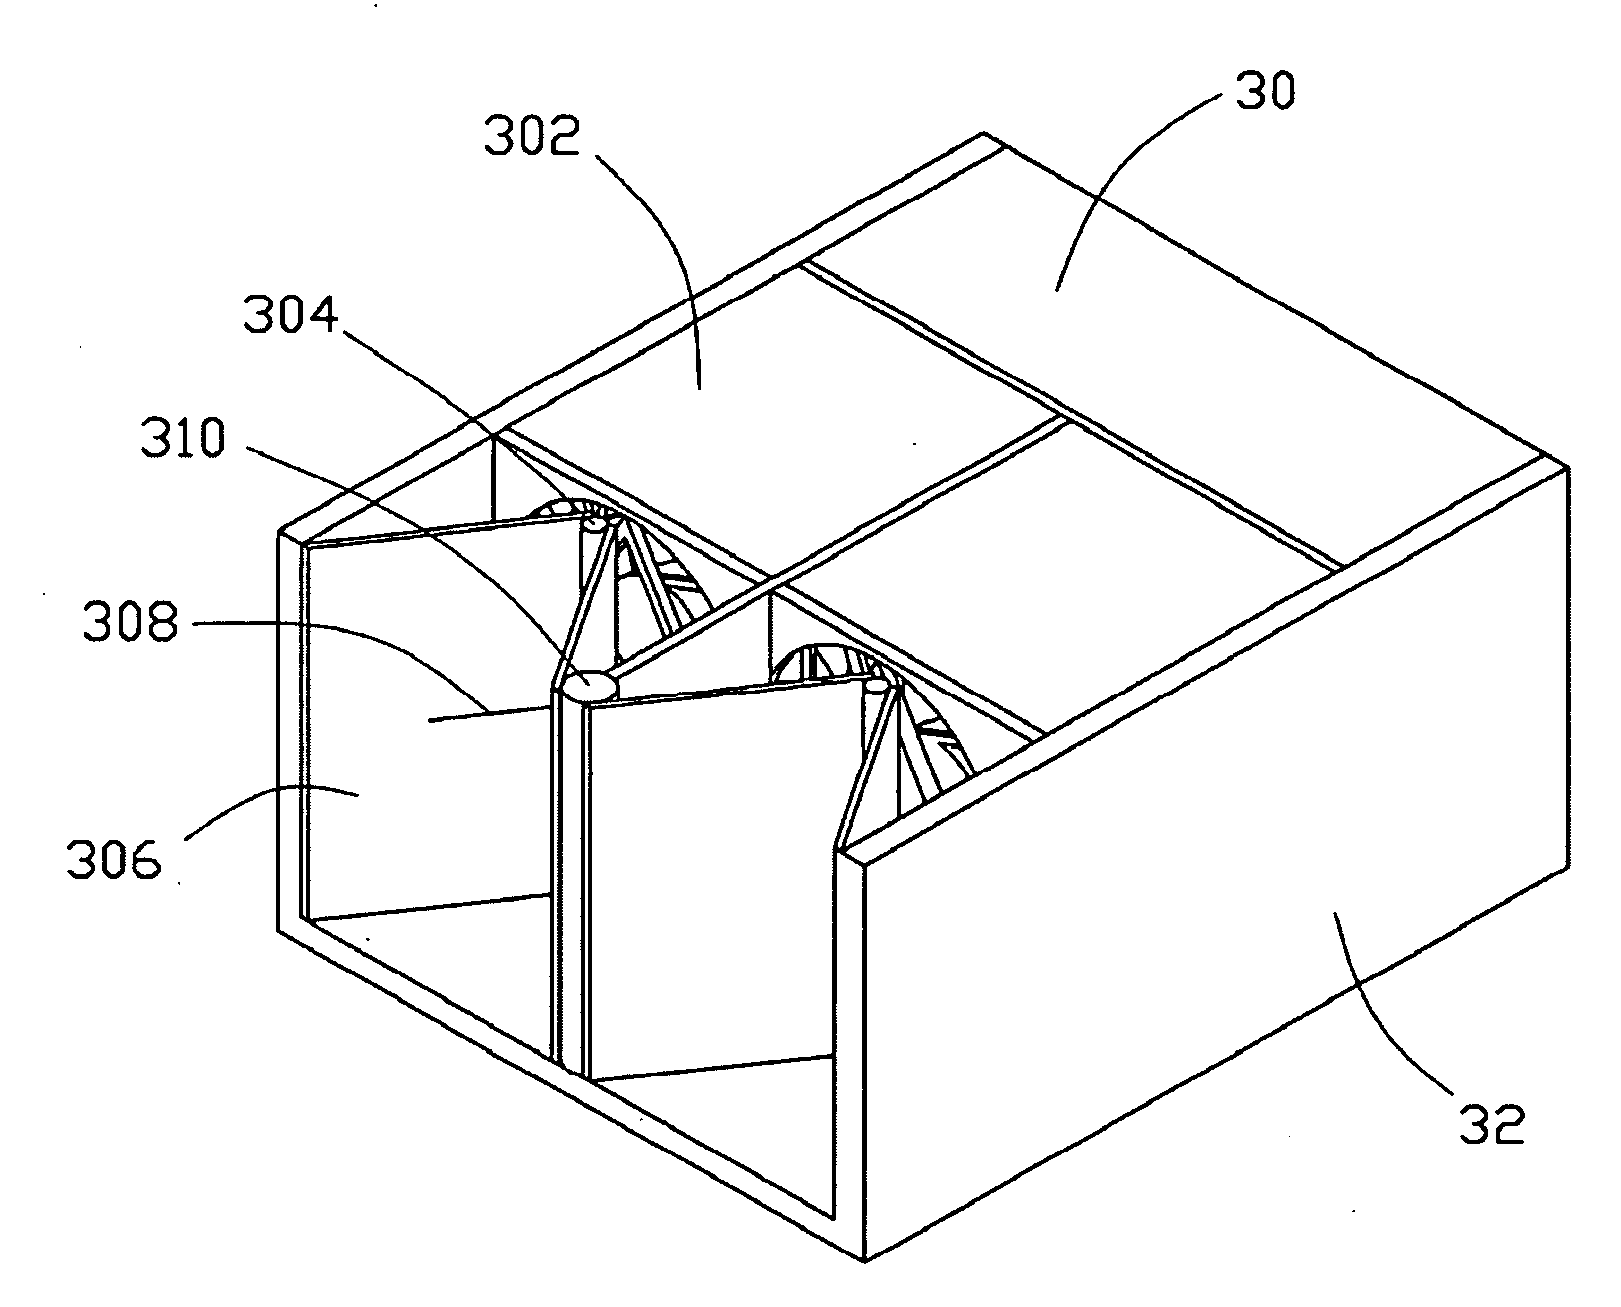 Electronic system with guide apparatus for guiding air flow therein